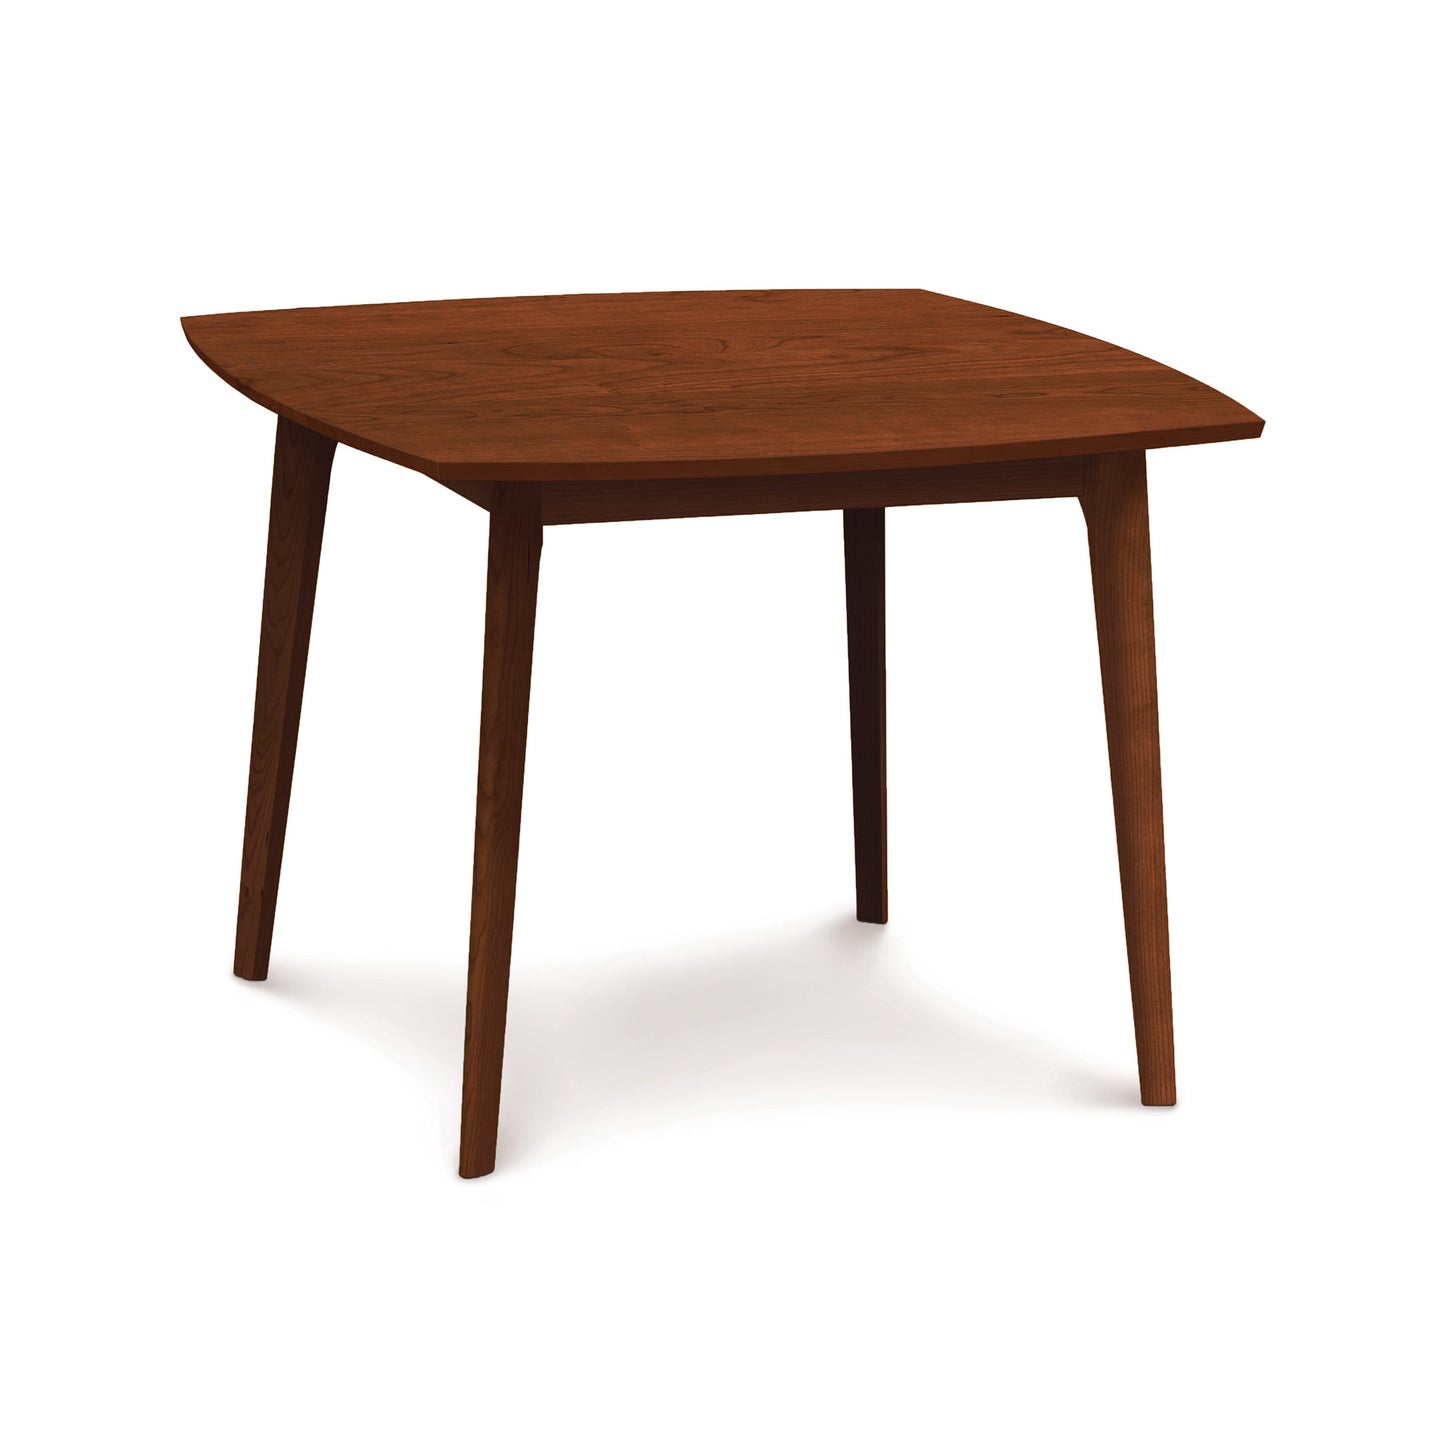 A solid wood Copeland Furniture Catalina Solid-Top Table with a smooth surface and angled legs, isolated on a white background.